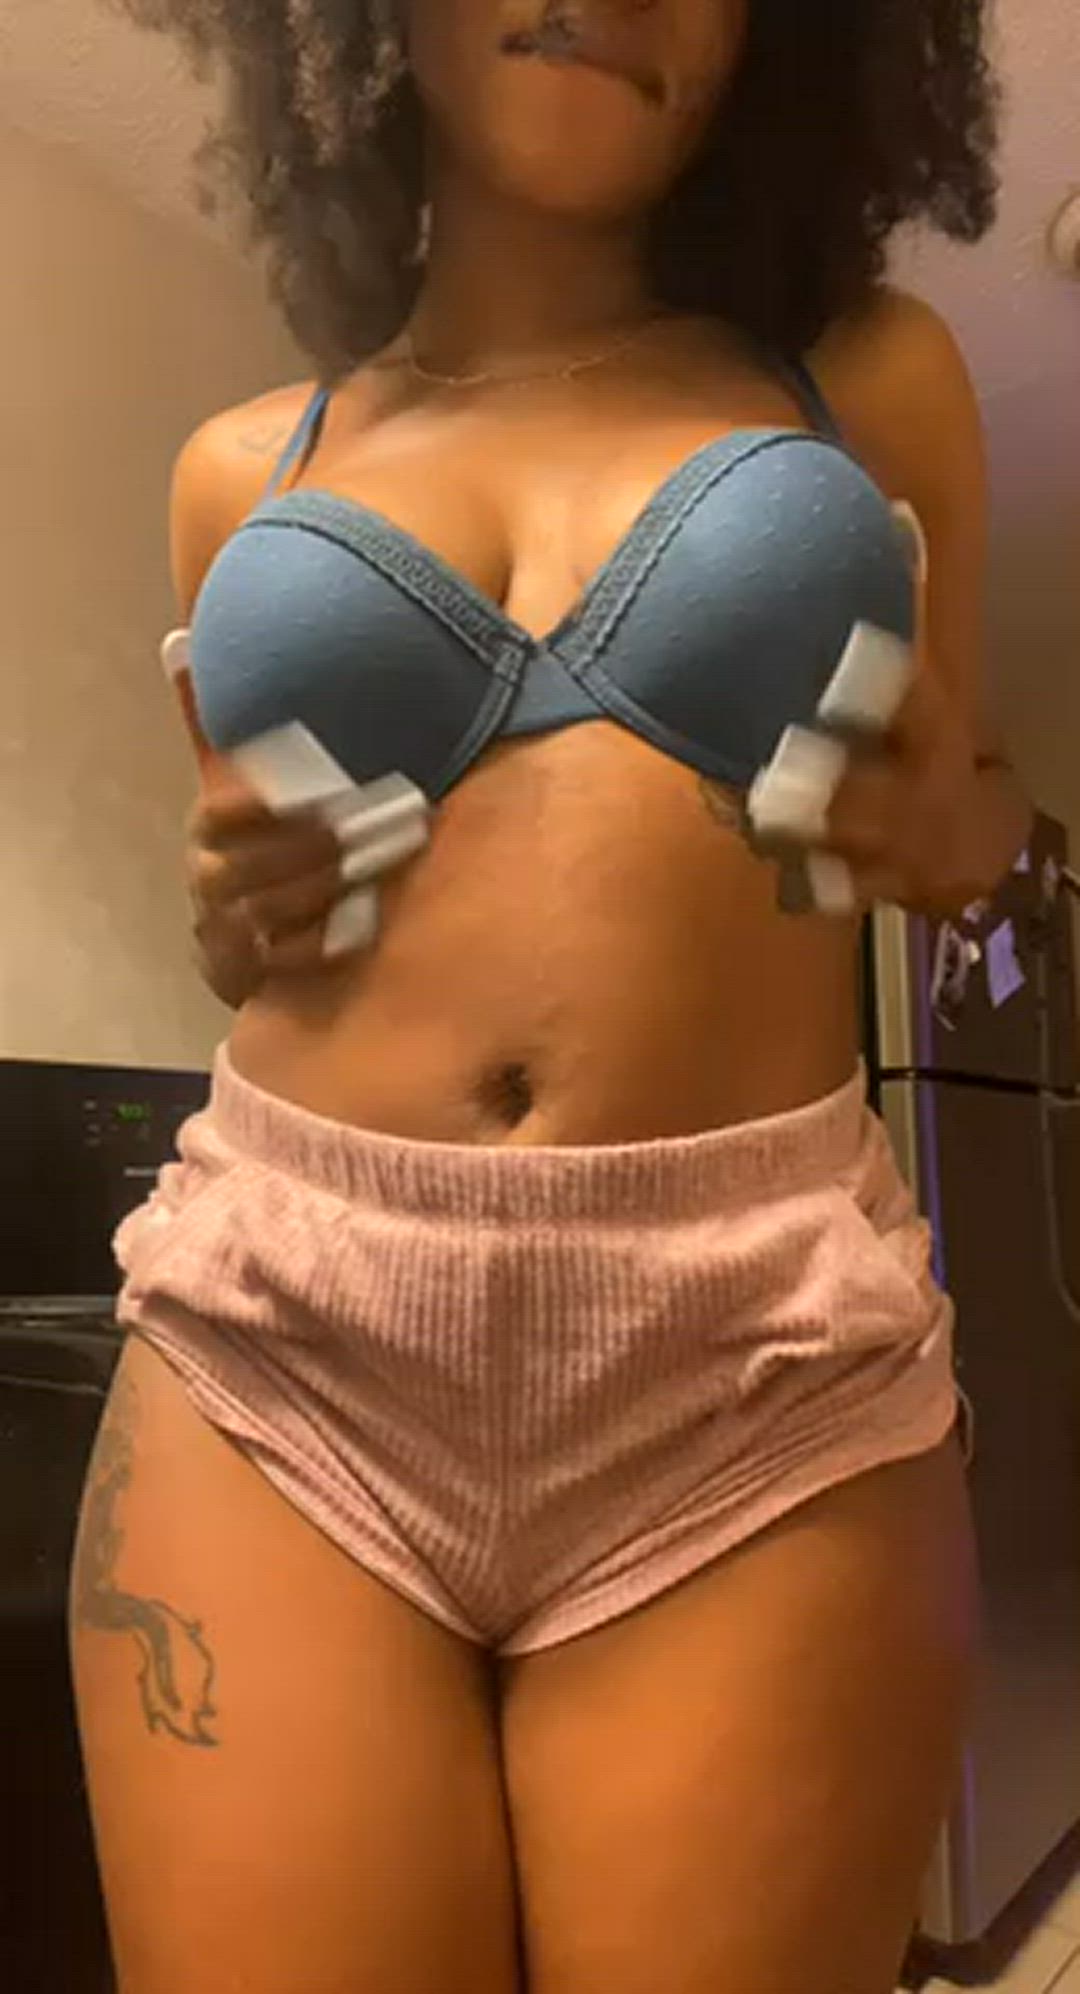 Ass porn video with onlyfans model Honey princess <strong>@sweetgyalx</strong>